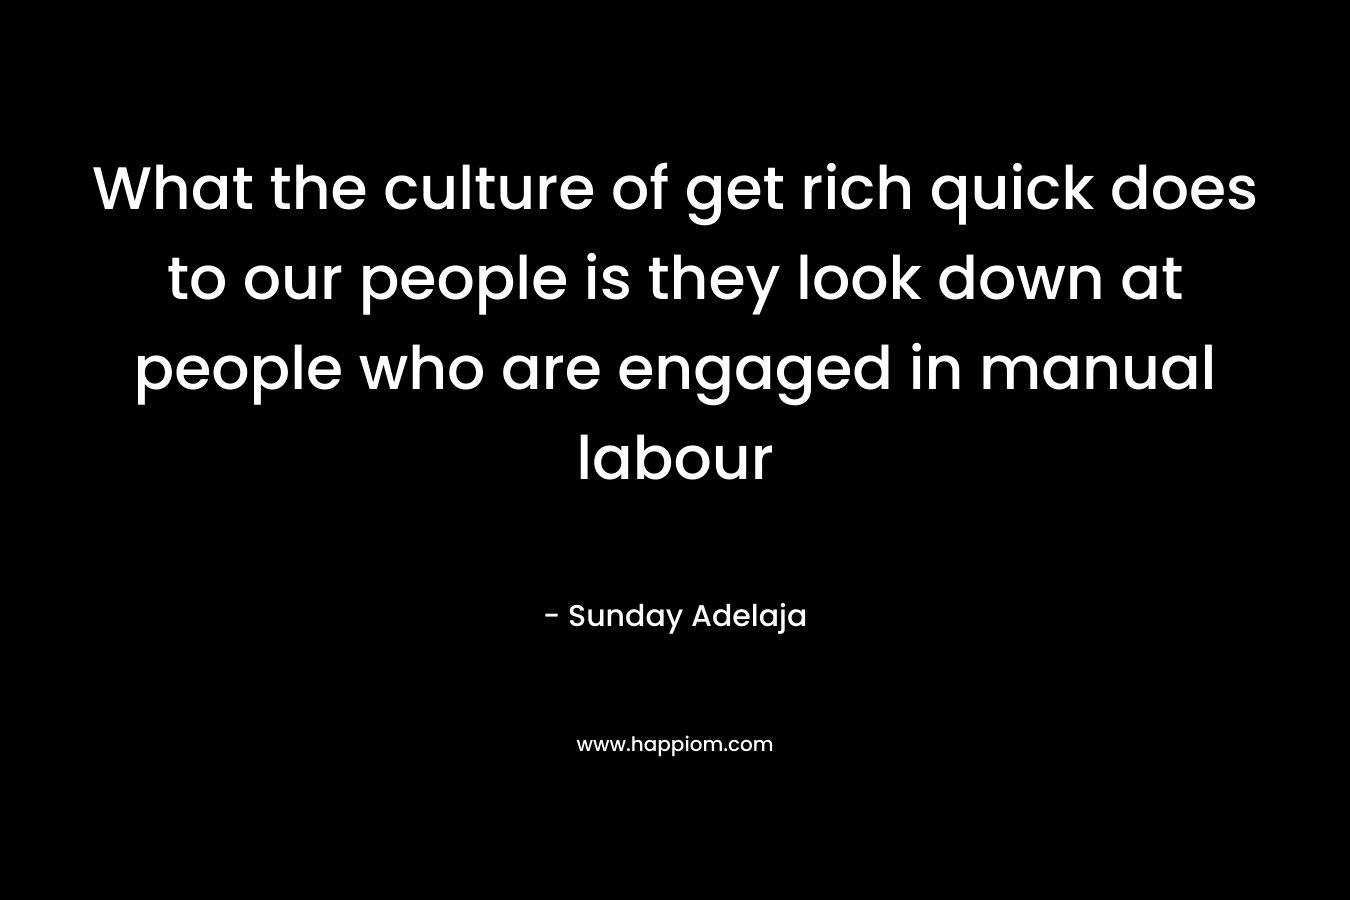 What the culture of get rich quick does to our people is they look down at people who are engaged in manual labour